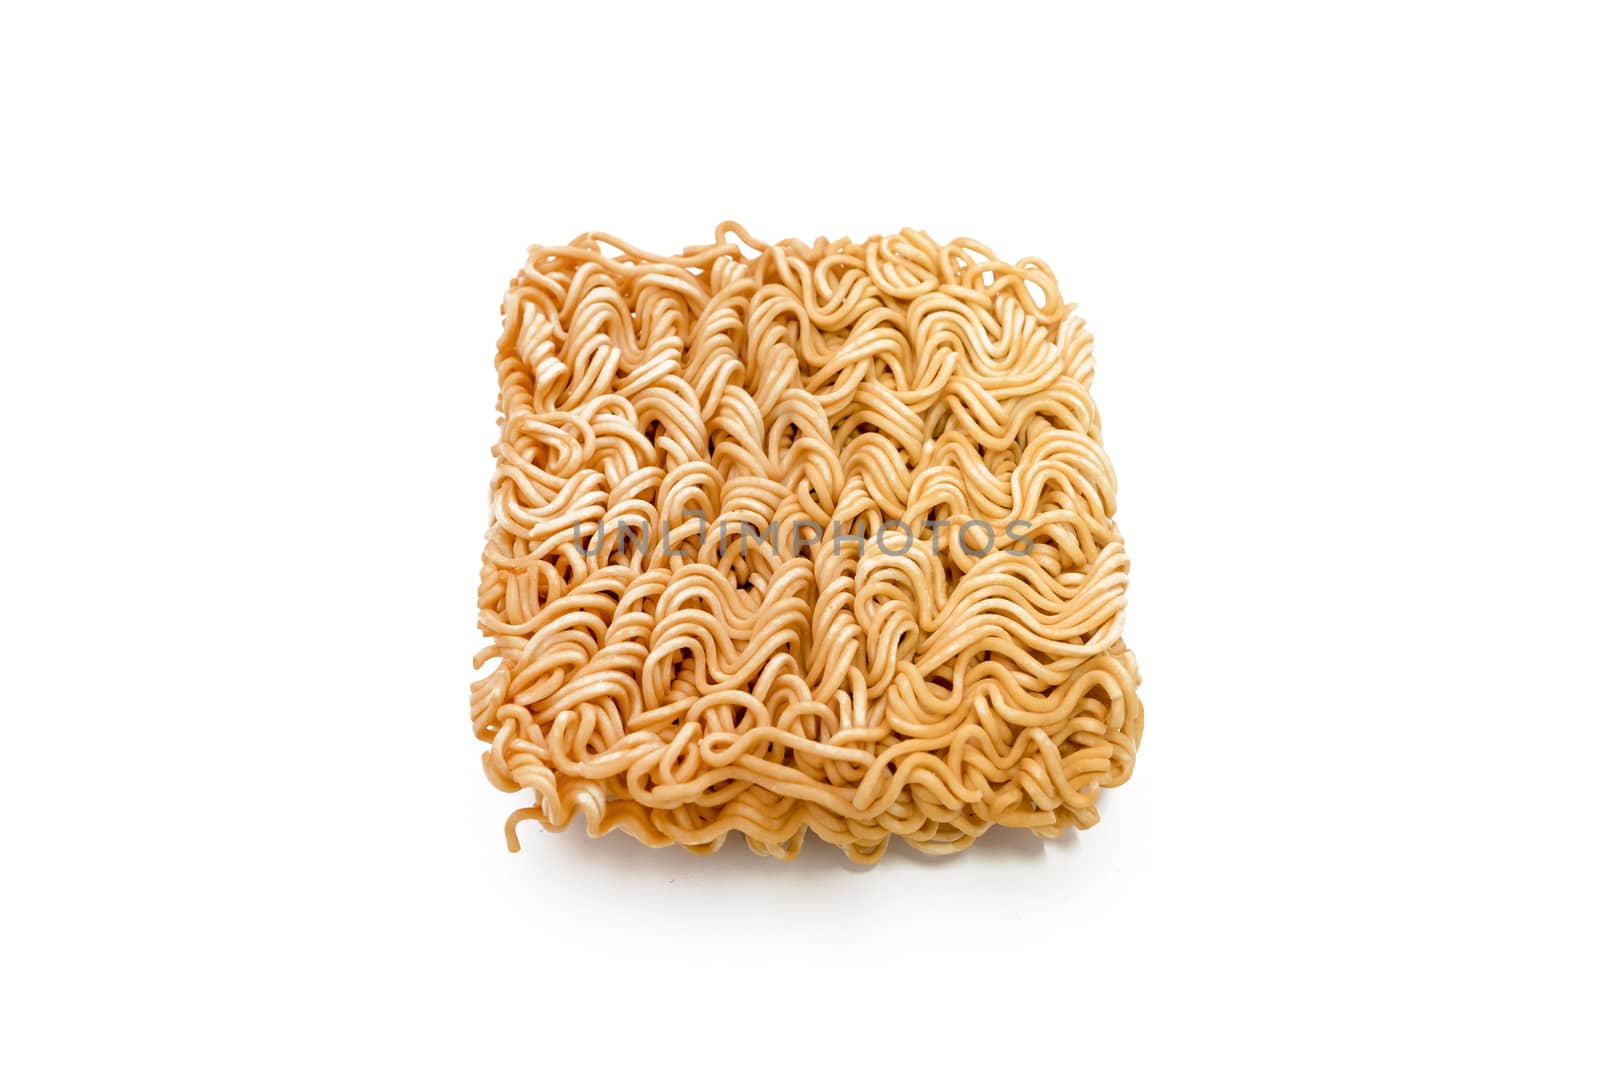 Instant noodles isolated on white background.